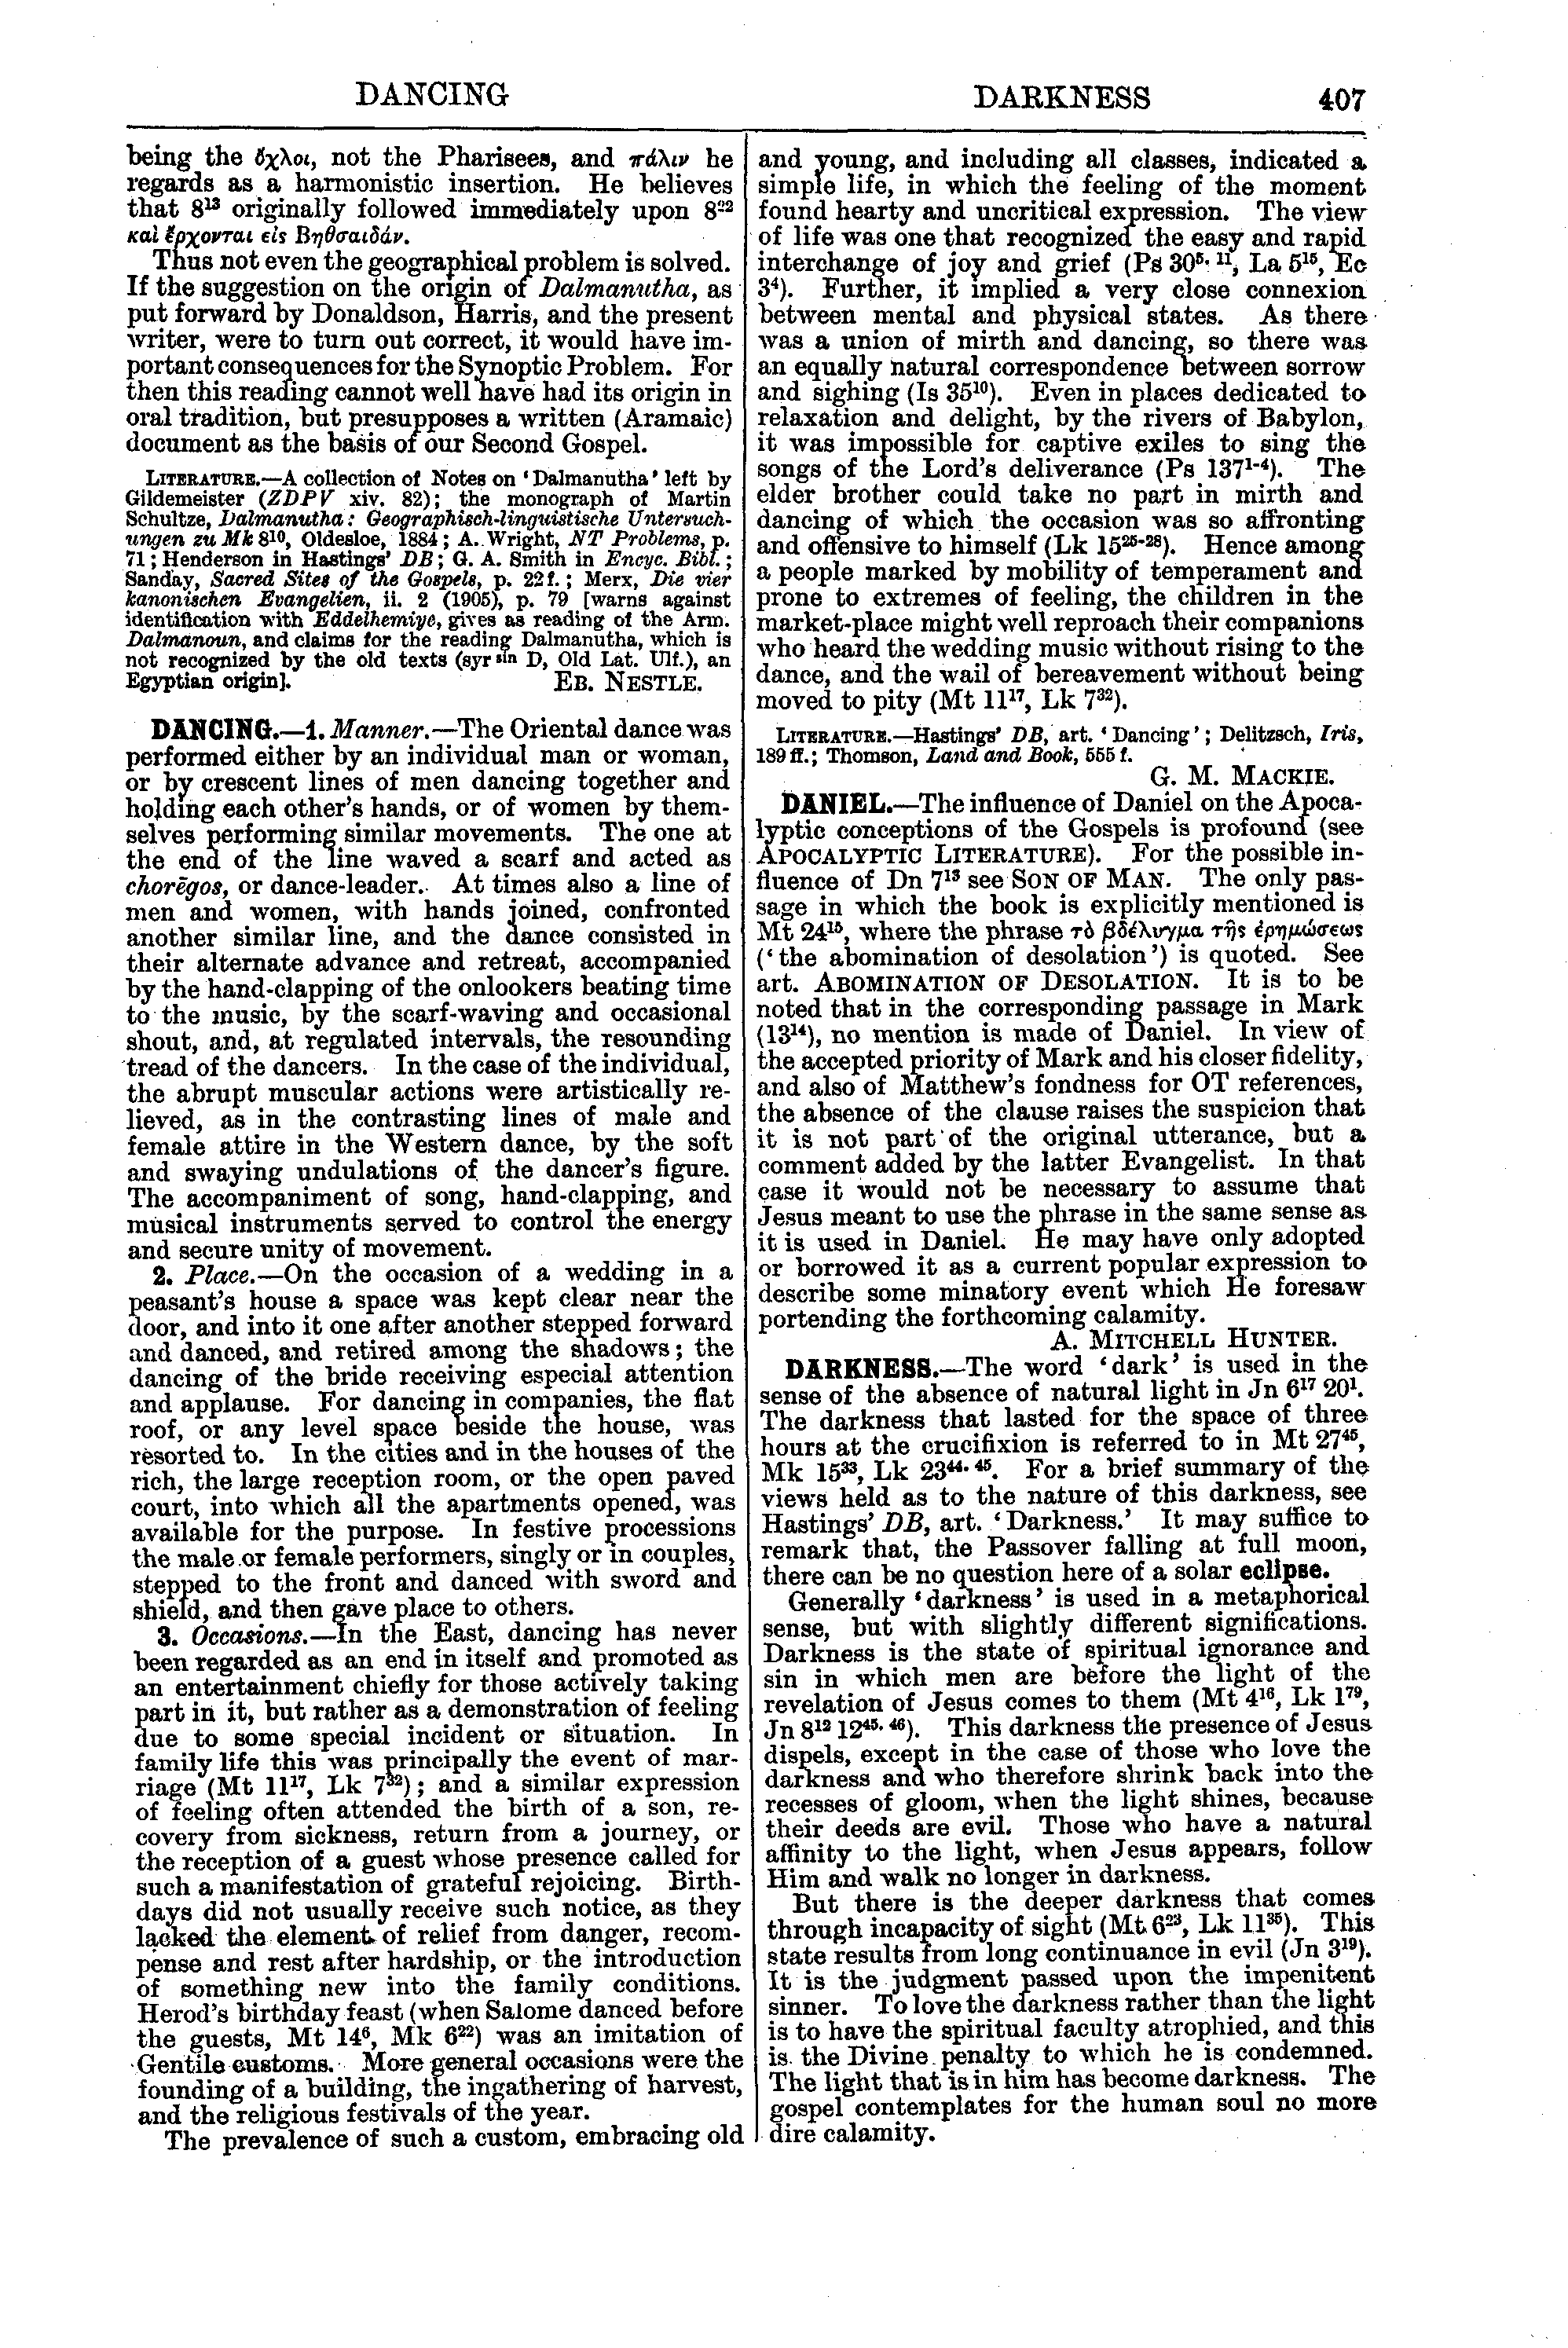 Image of page 407